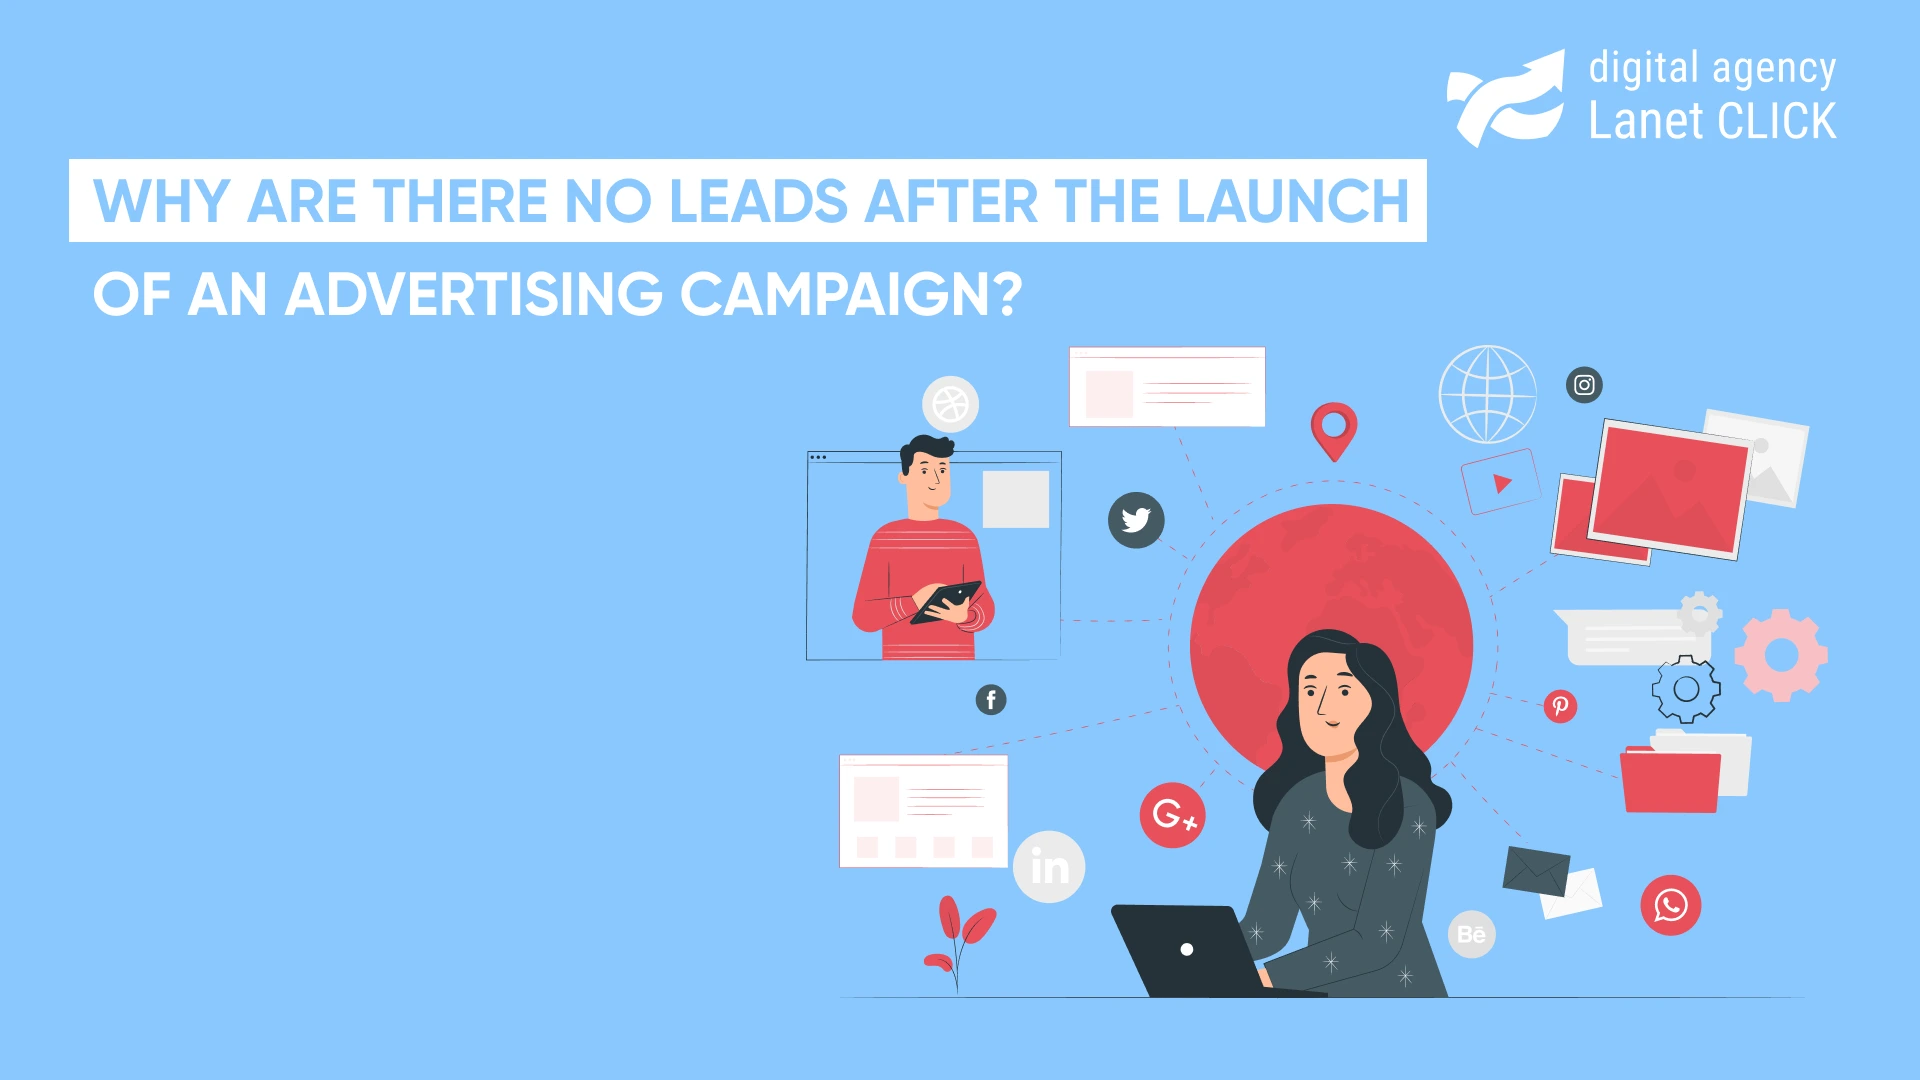 Why don’t you get conversions and leads after launching an ad campaign